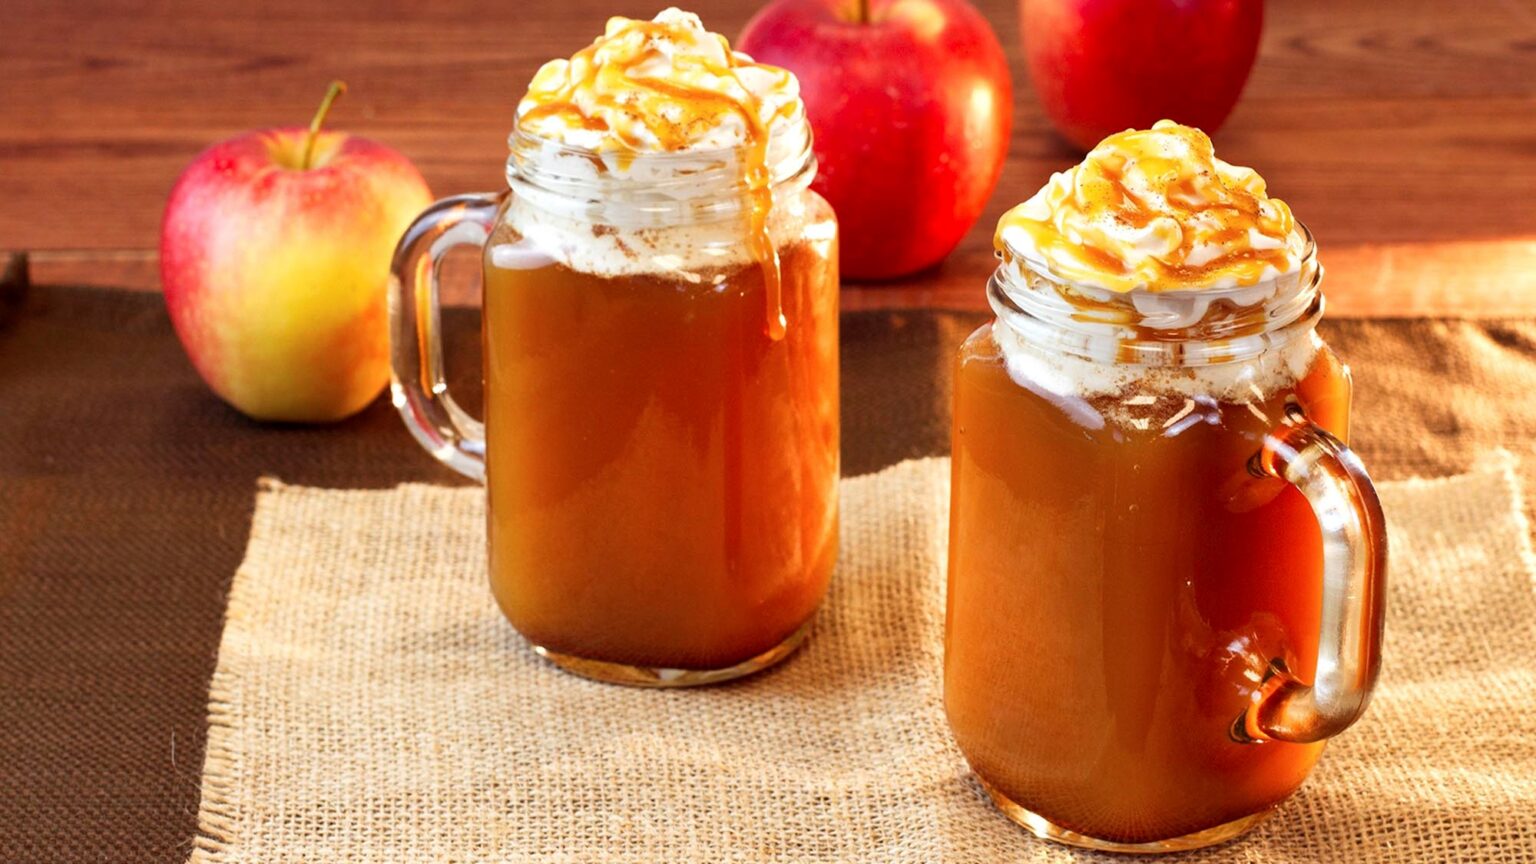 This personality quiz will decide once and for all what fall drink fits your personality best. Are you a pumpkin spice latte or an apple cider?